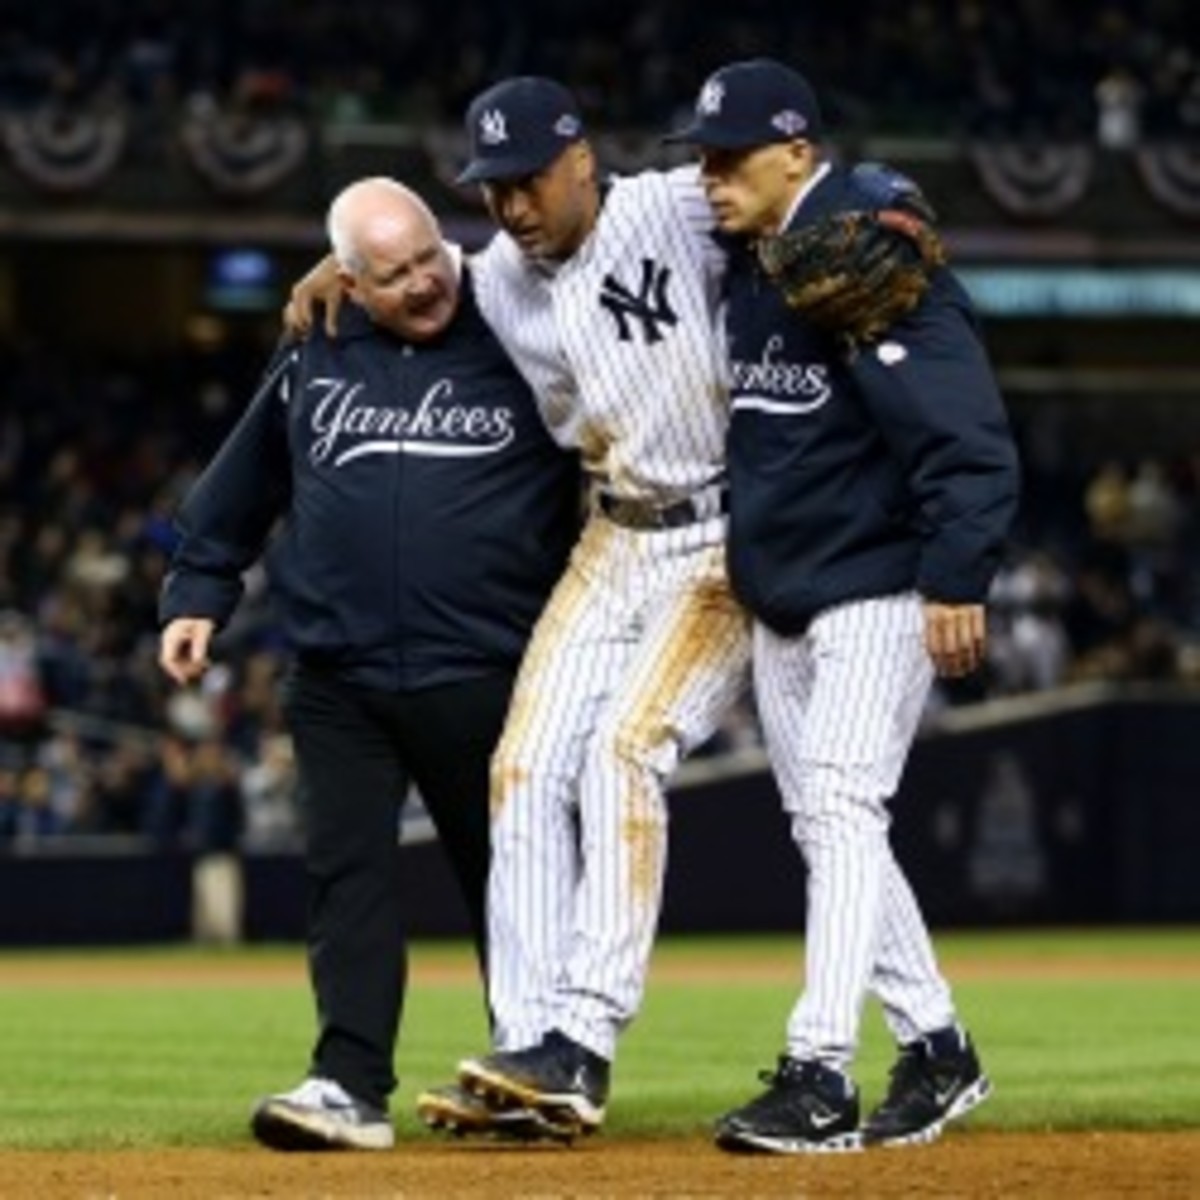 Yankees shortstop Derek Jeter said there's "no question" he'd be ready to play by Opening Day after breaking his ankle in the ALCS. (Al Bello/Getty Images)